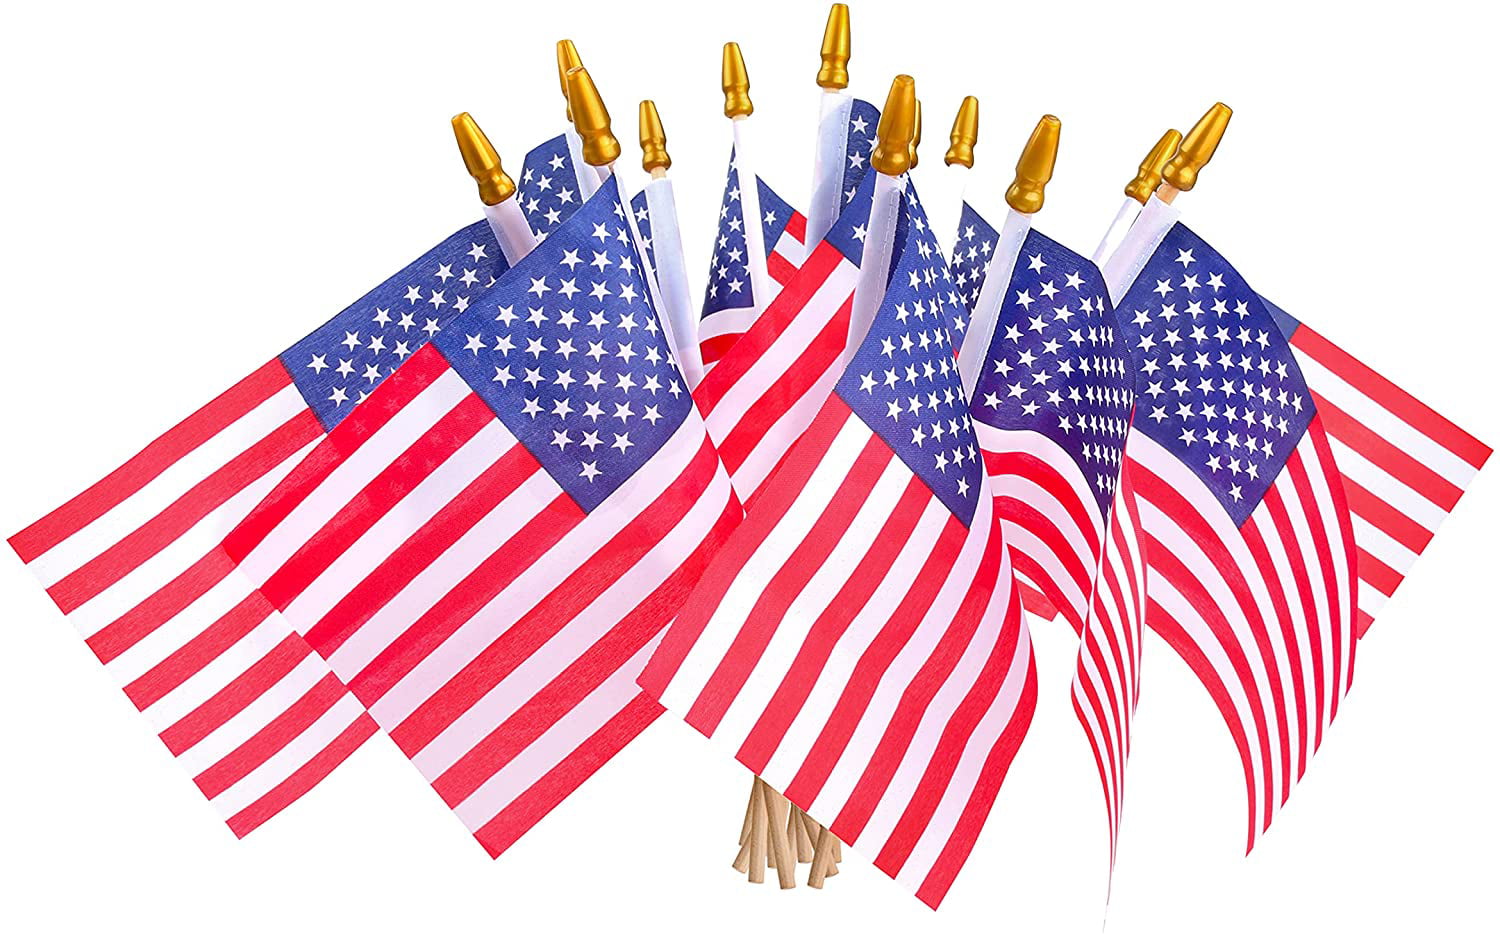 12 Pcs USA 4x6 Wooden Stick Flag,July 4th Decoration Mini American Stick Flag American Hand Held Stick Flags with Safety Golden Spear Top Veteran Party 